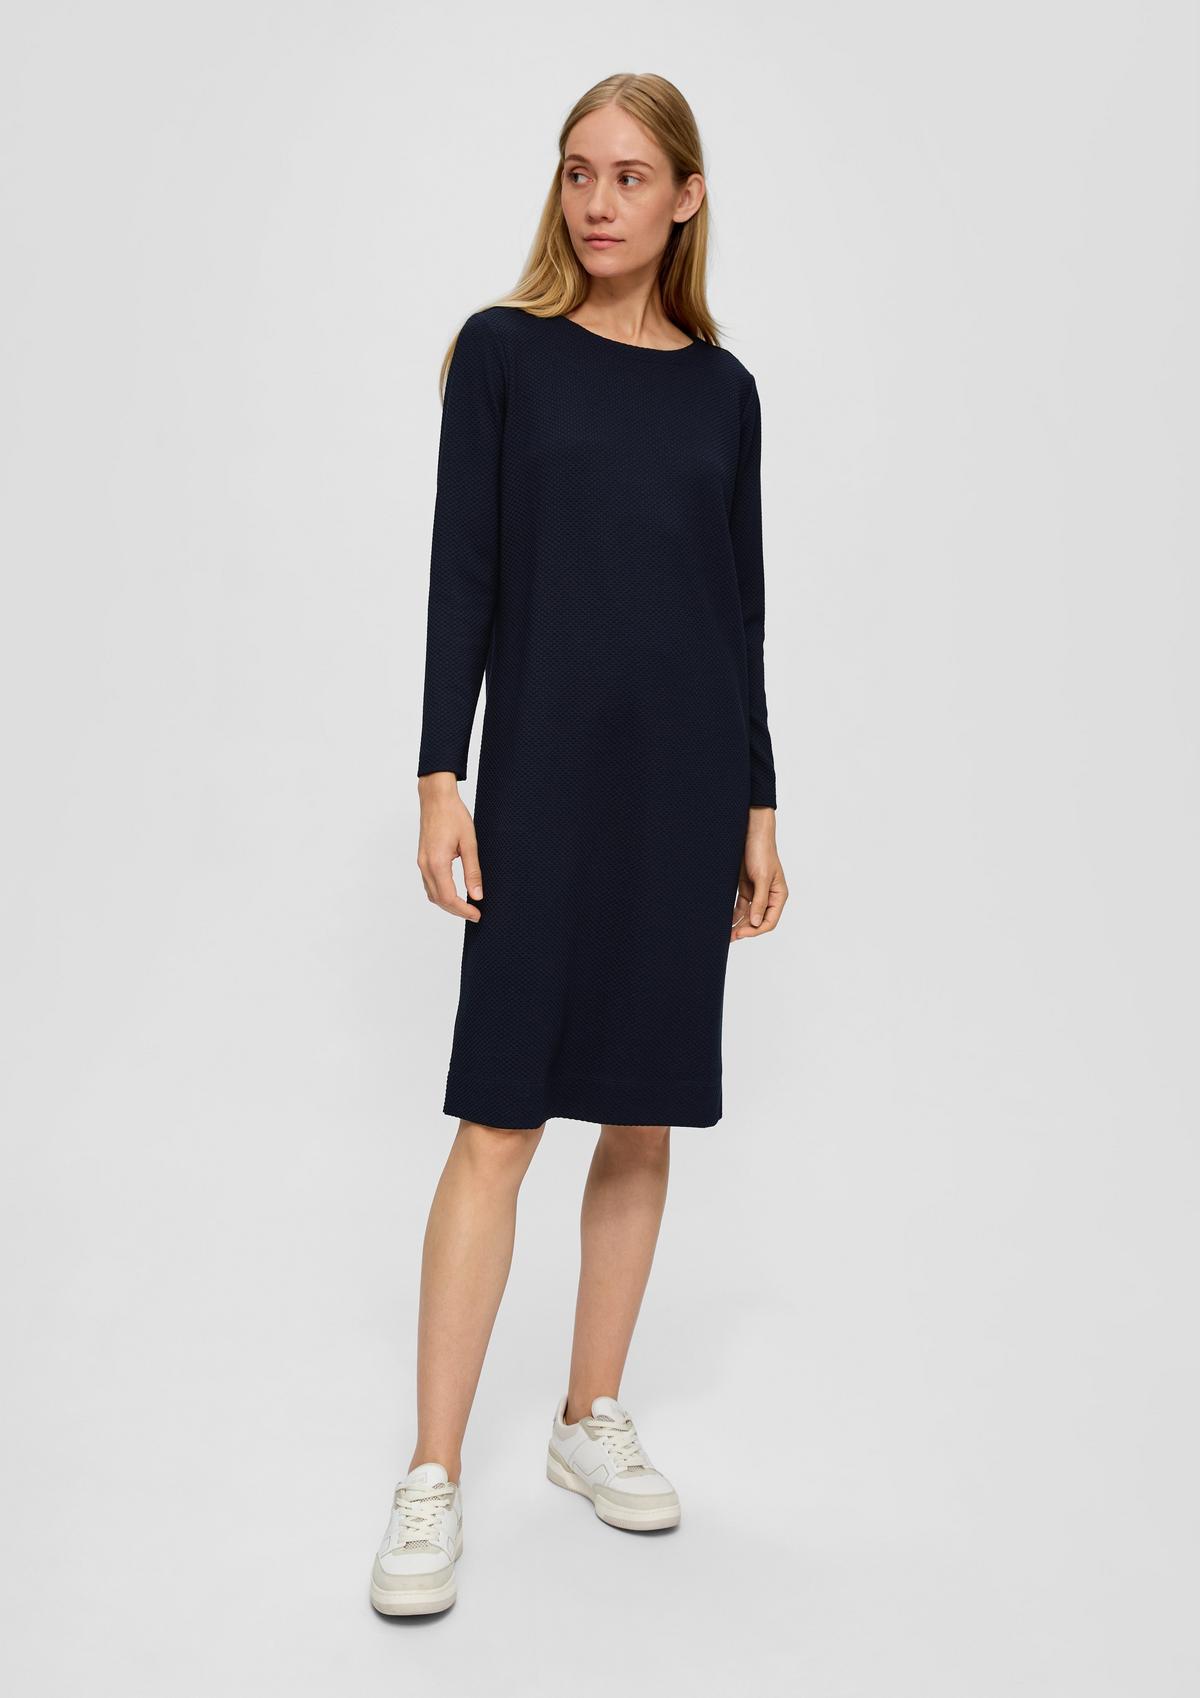 s.Oliver Jersey dress with a textured pattern